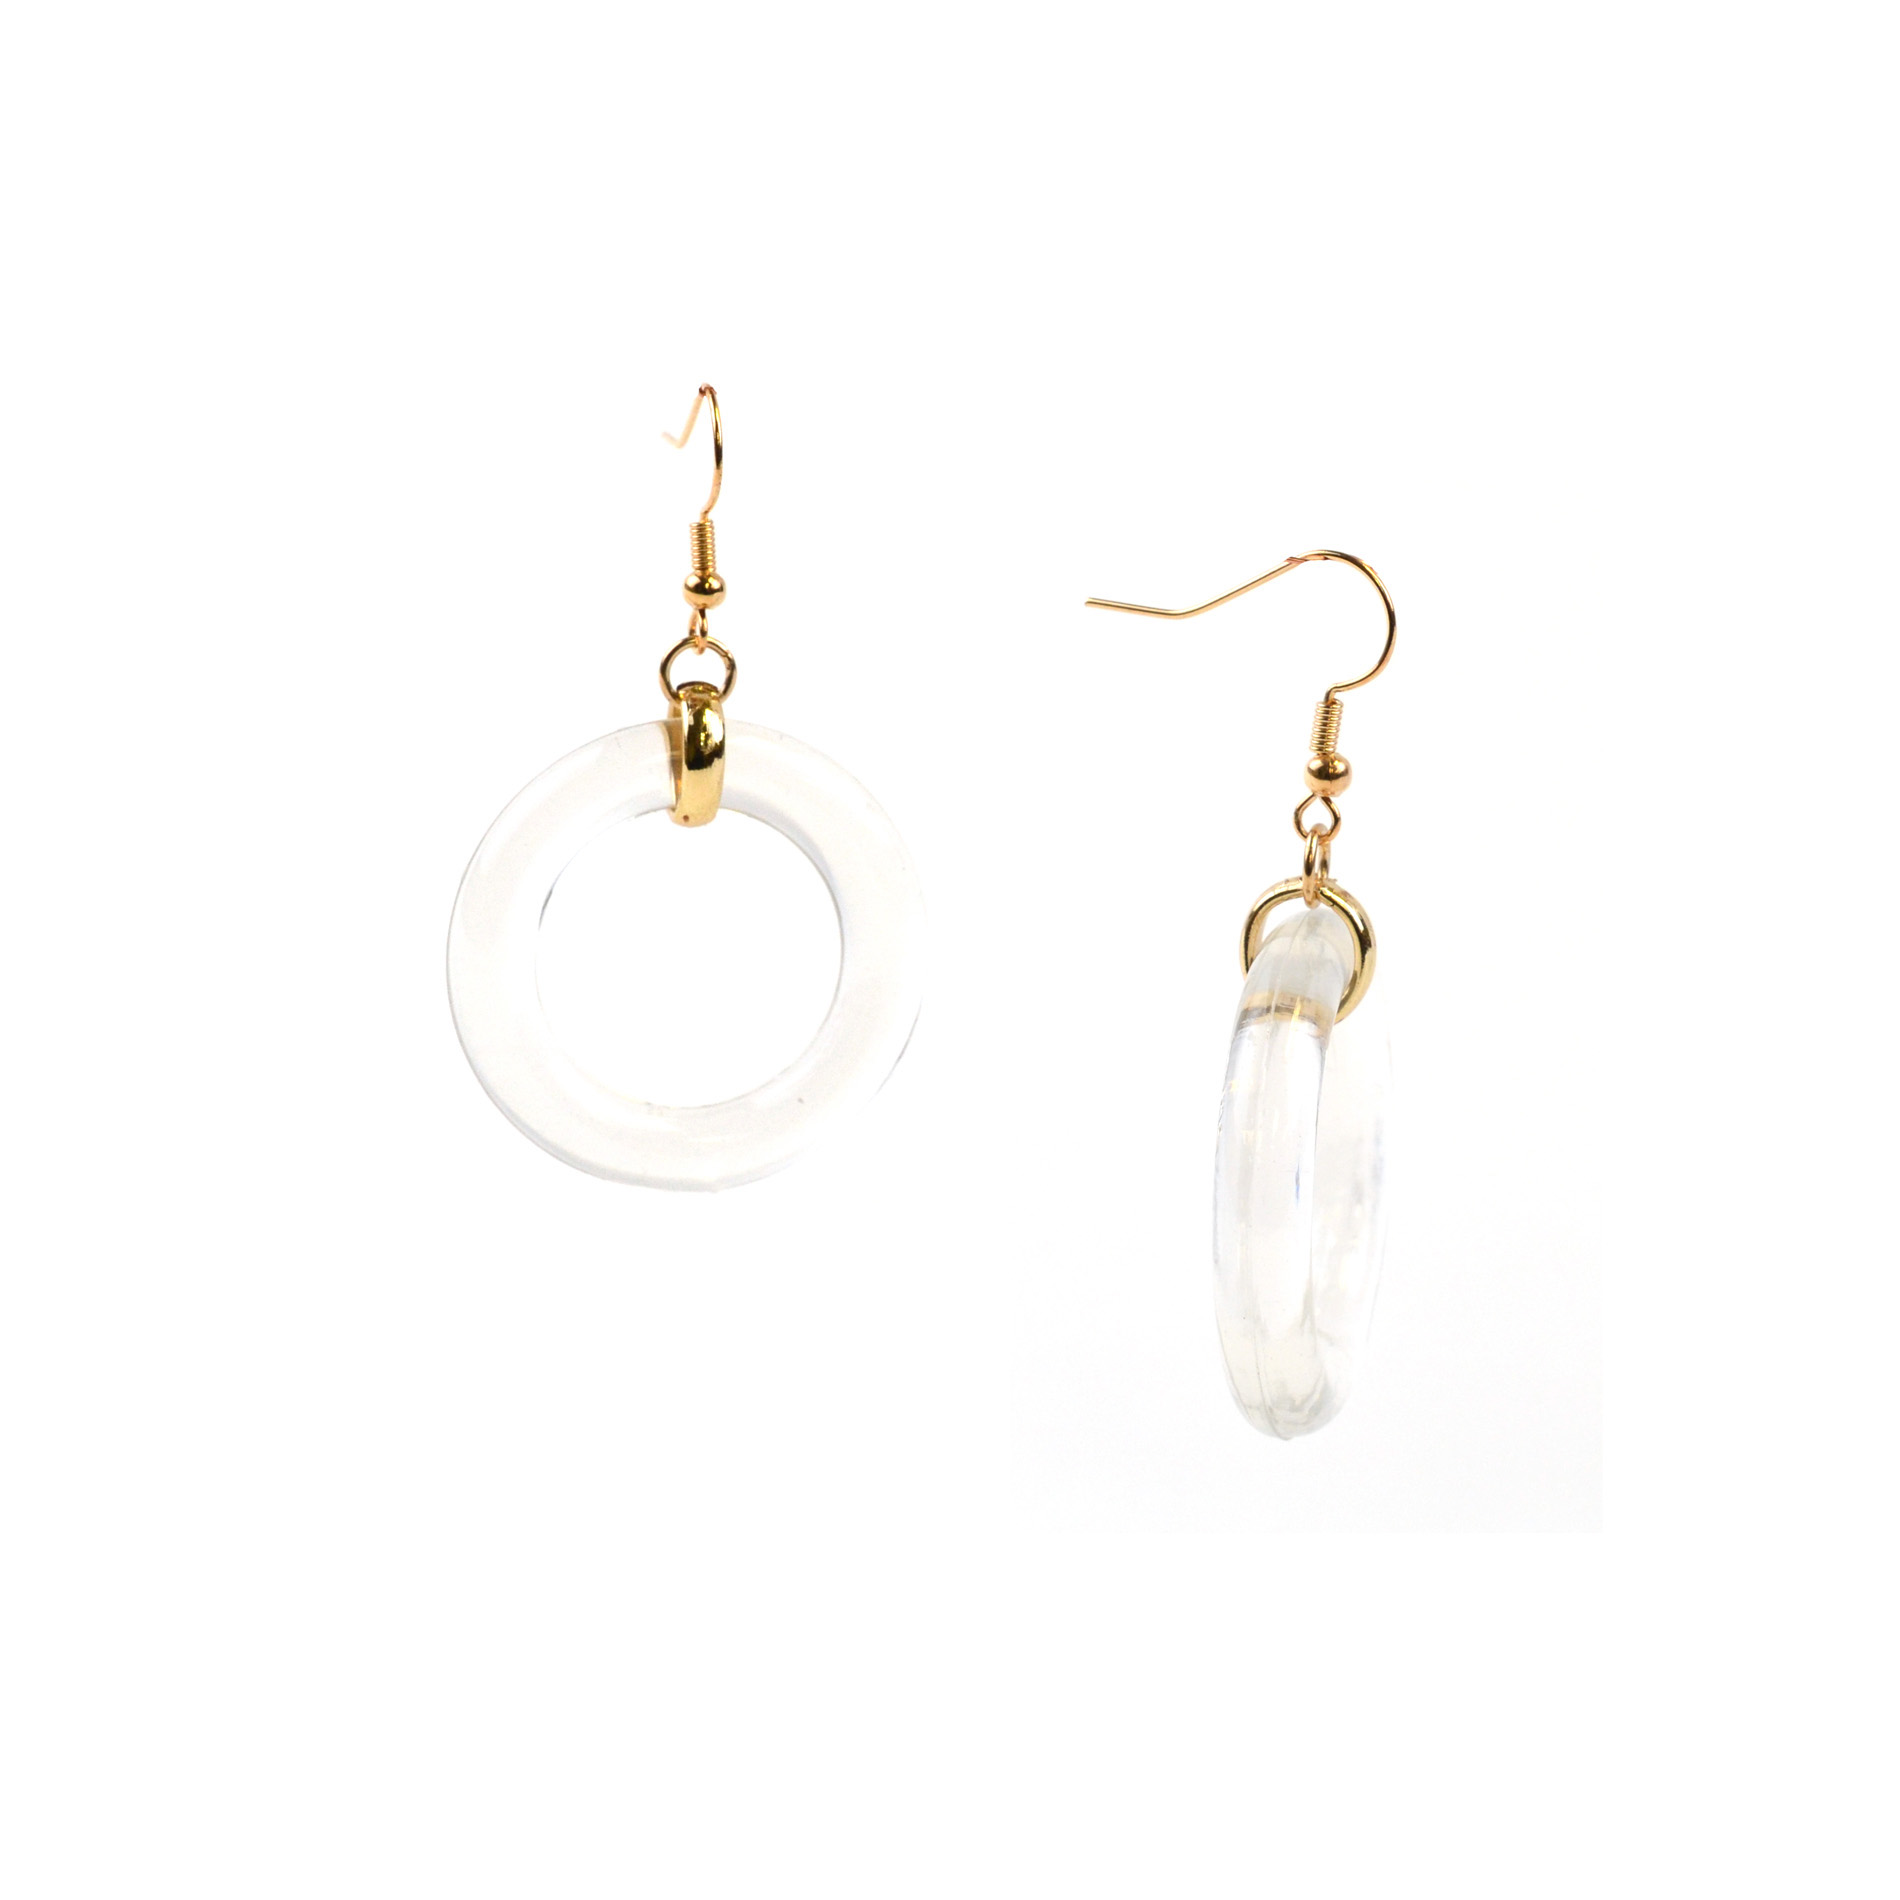 Attention Lucite Ring Earrings